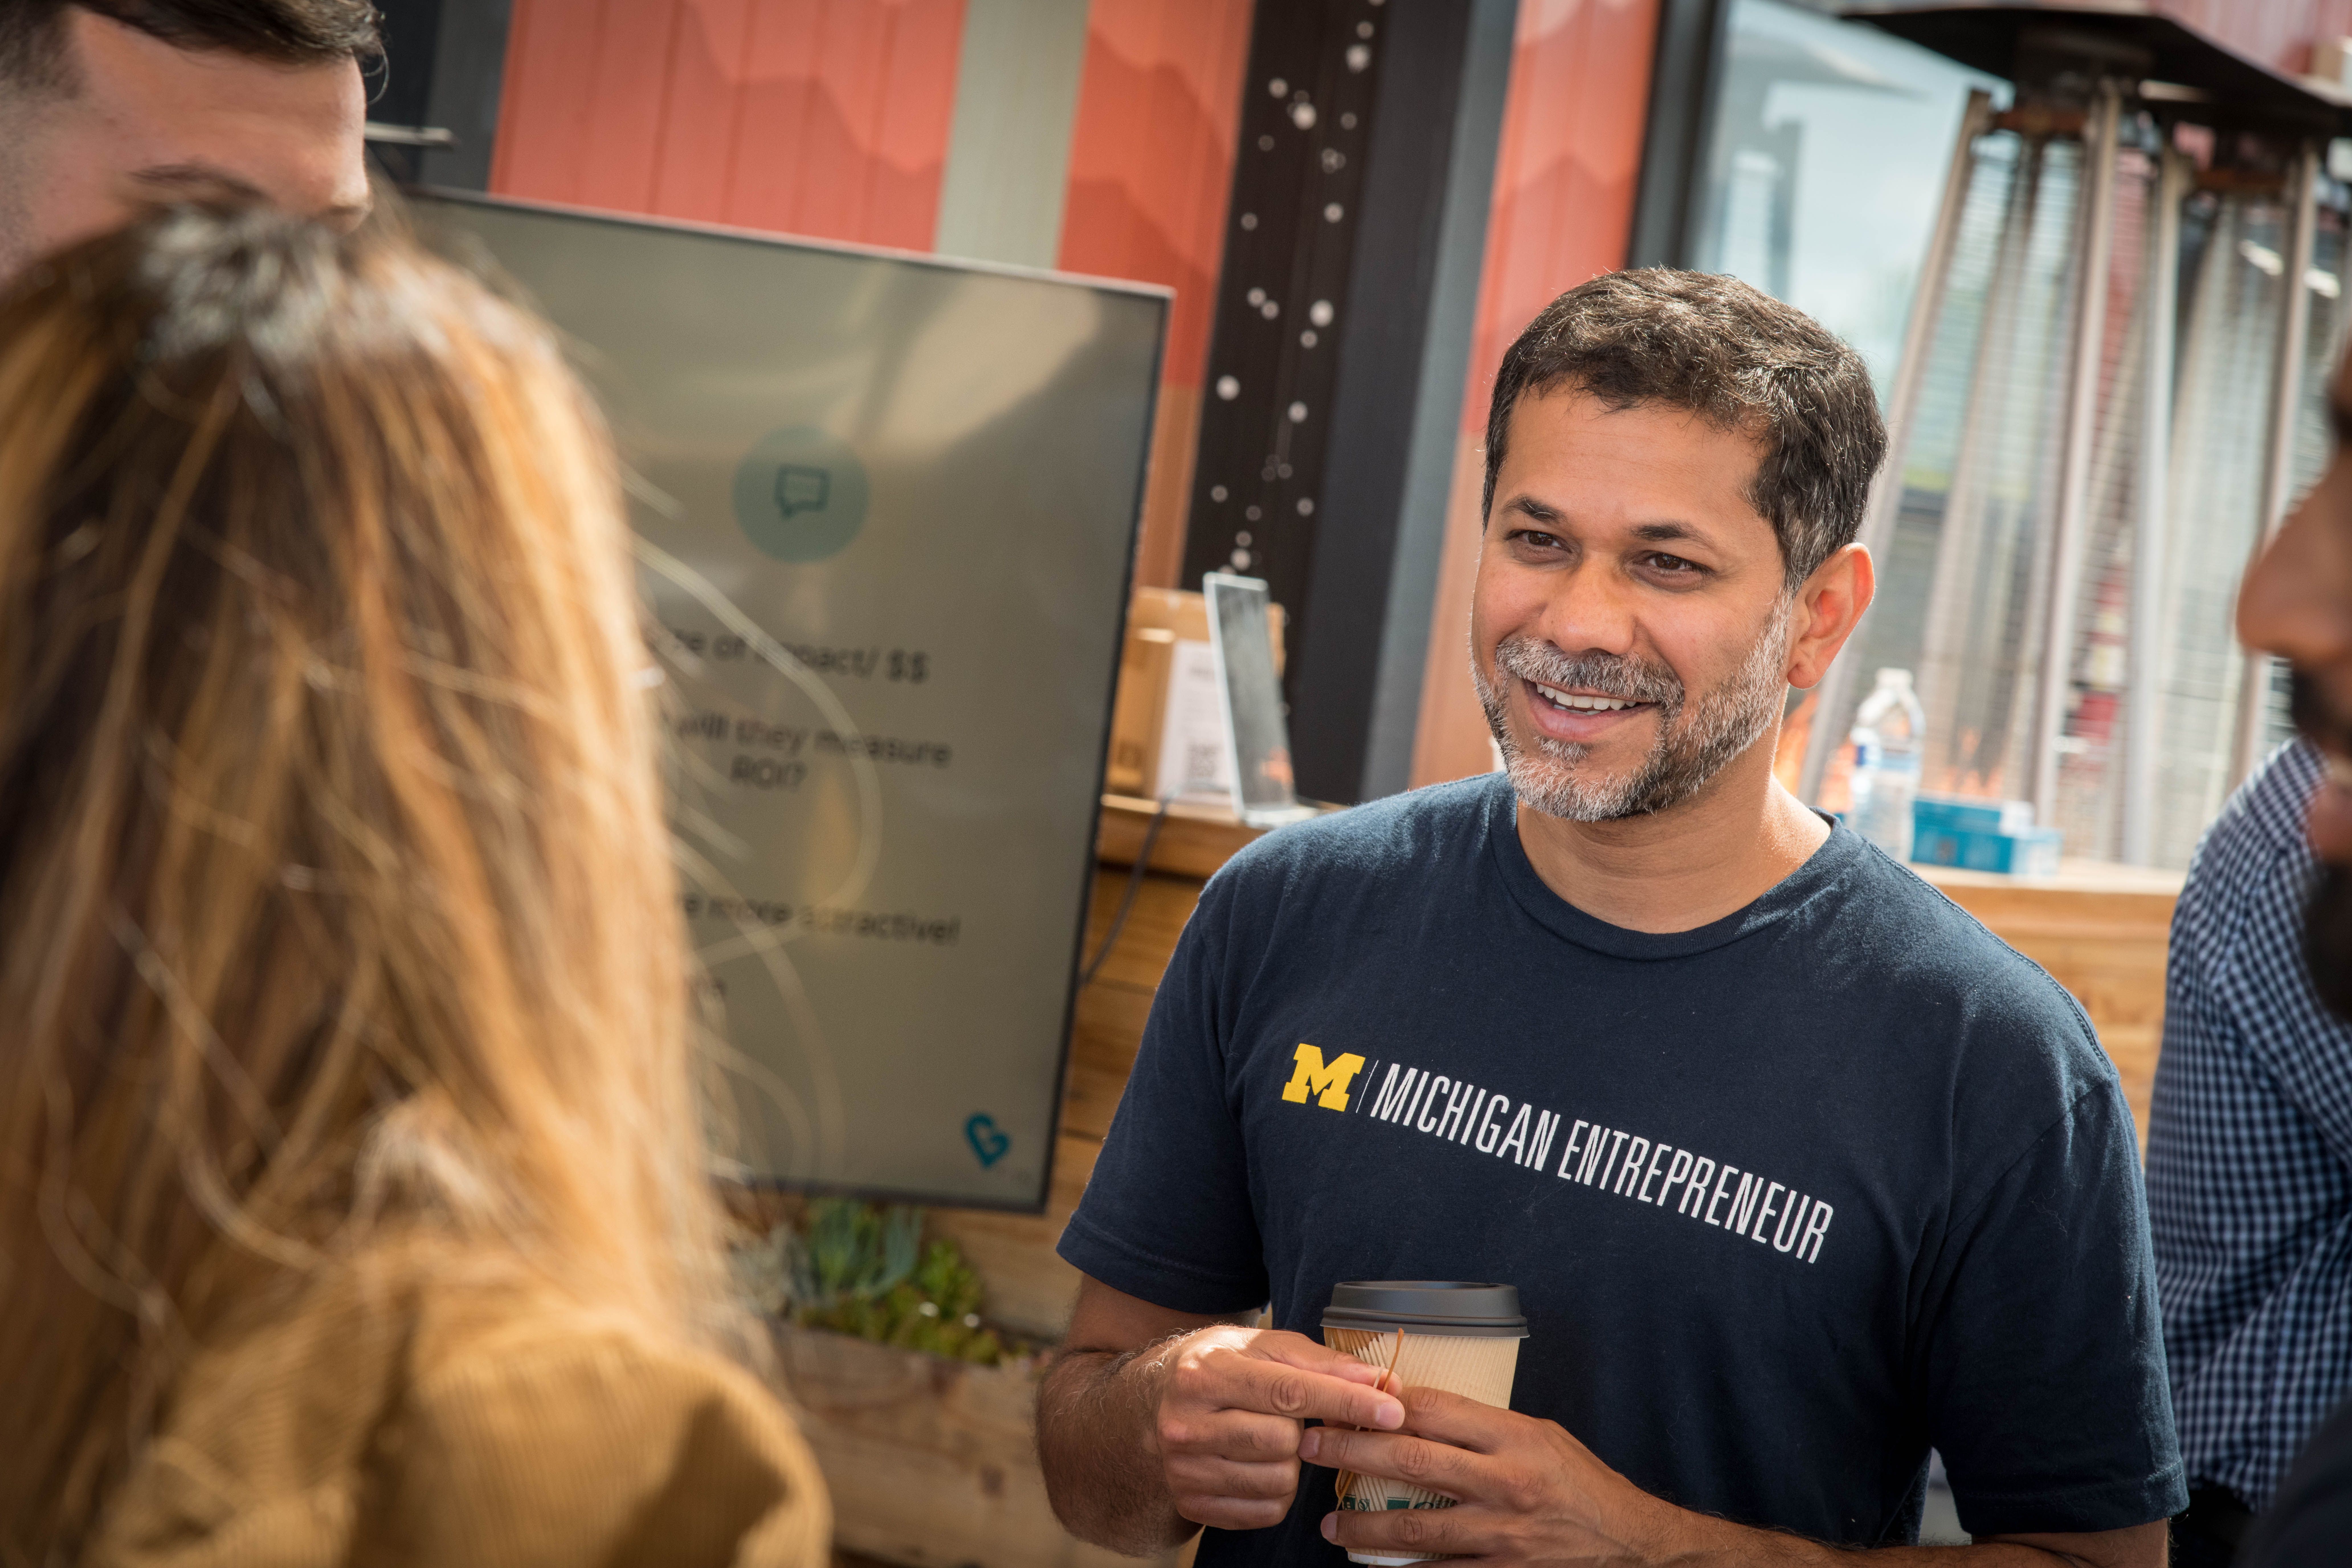 Inder Singh smiles while holding a cup of coffee and speaking with a trek student